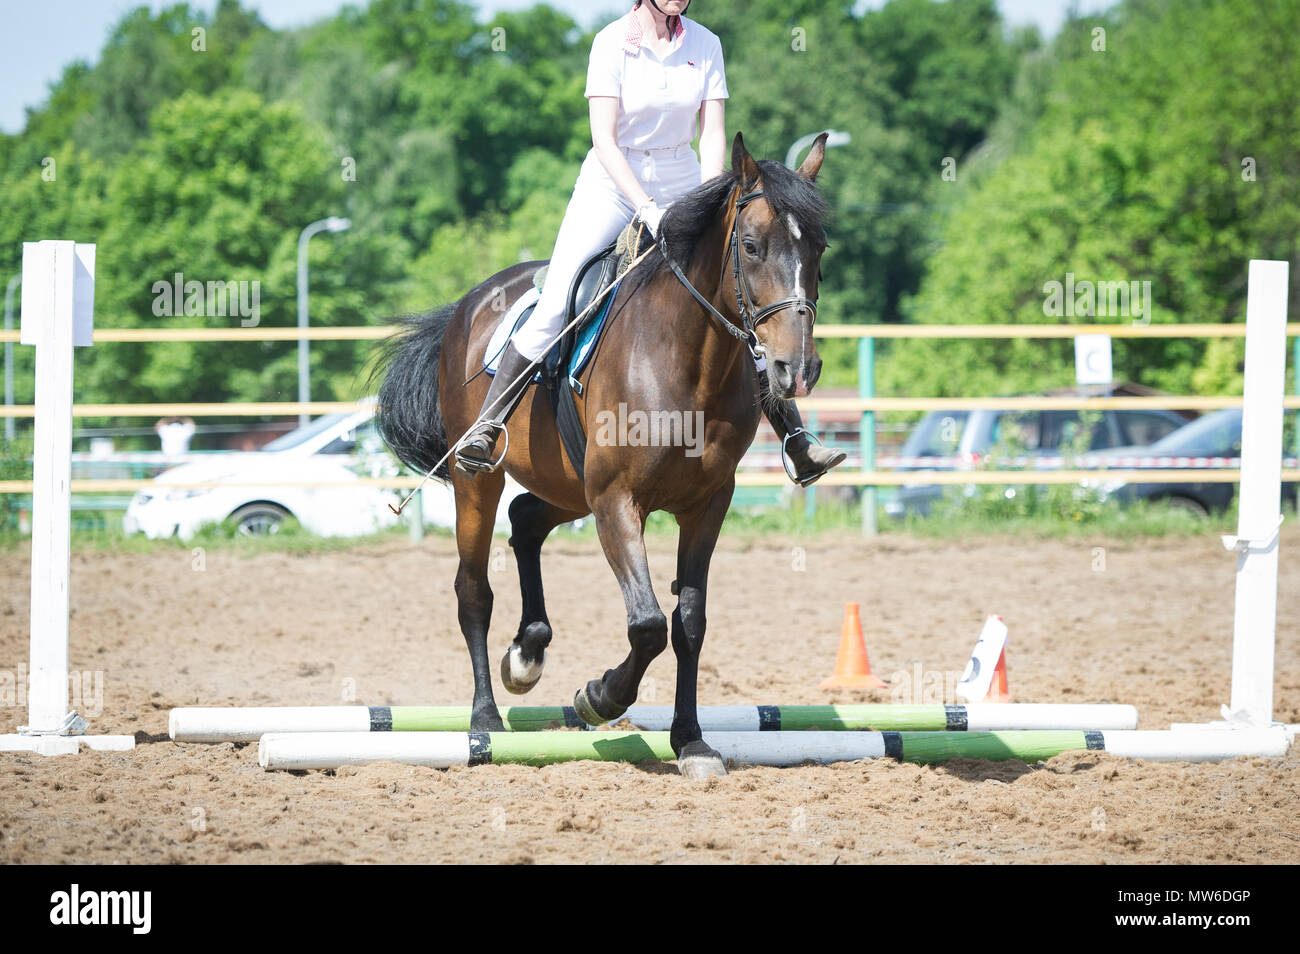 Training in horse riding, entry level. Overcoming a horseman on a bay horse obstacles - Cavaletti on a trot Stock Photo